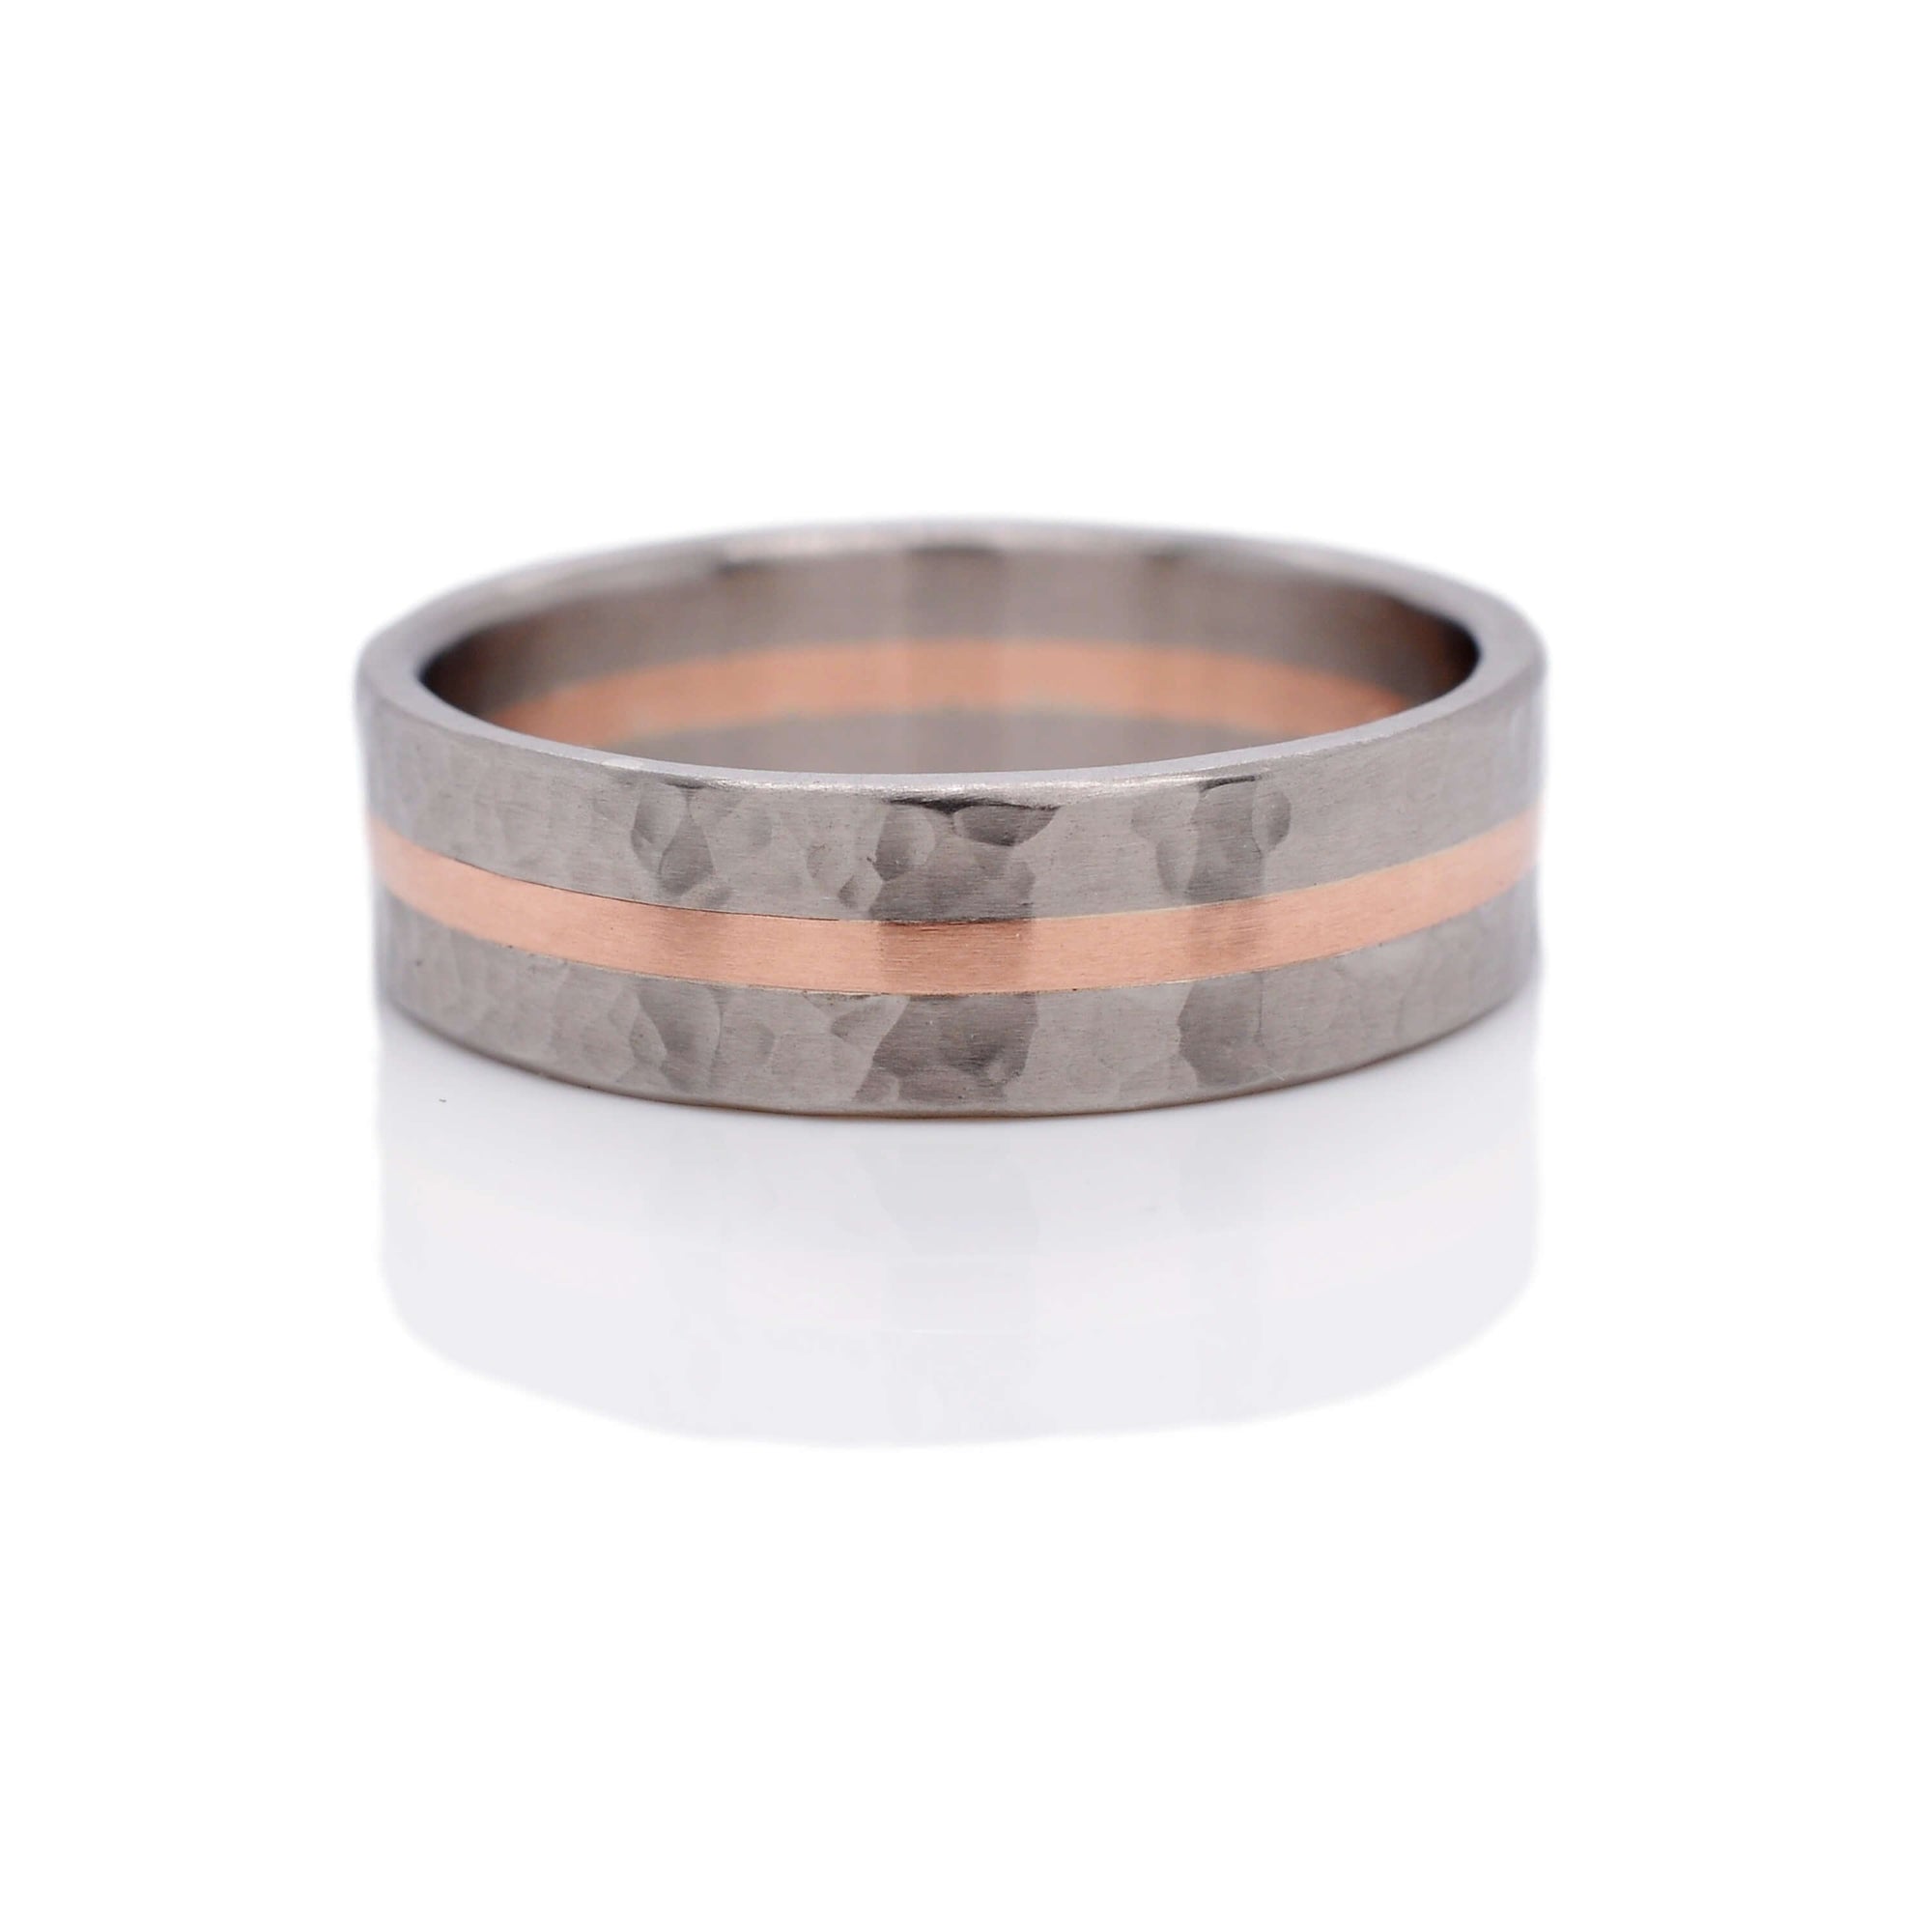 Hammered palladium and rose gold wedding band. Handmade with recycled metal.